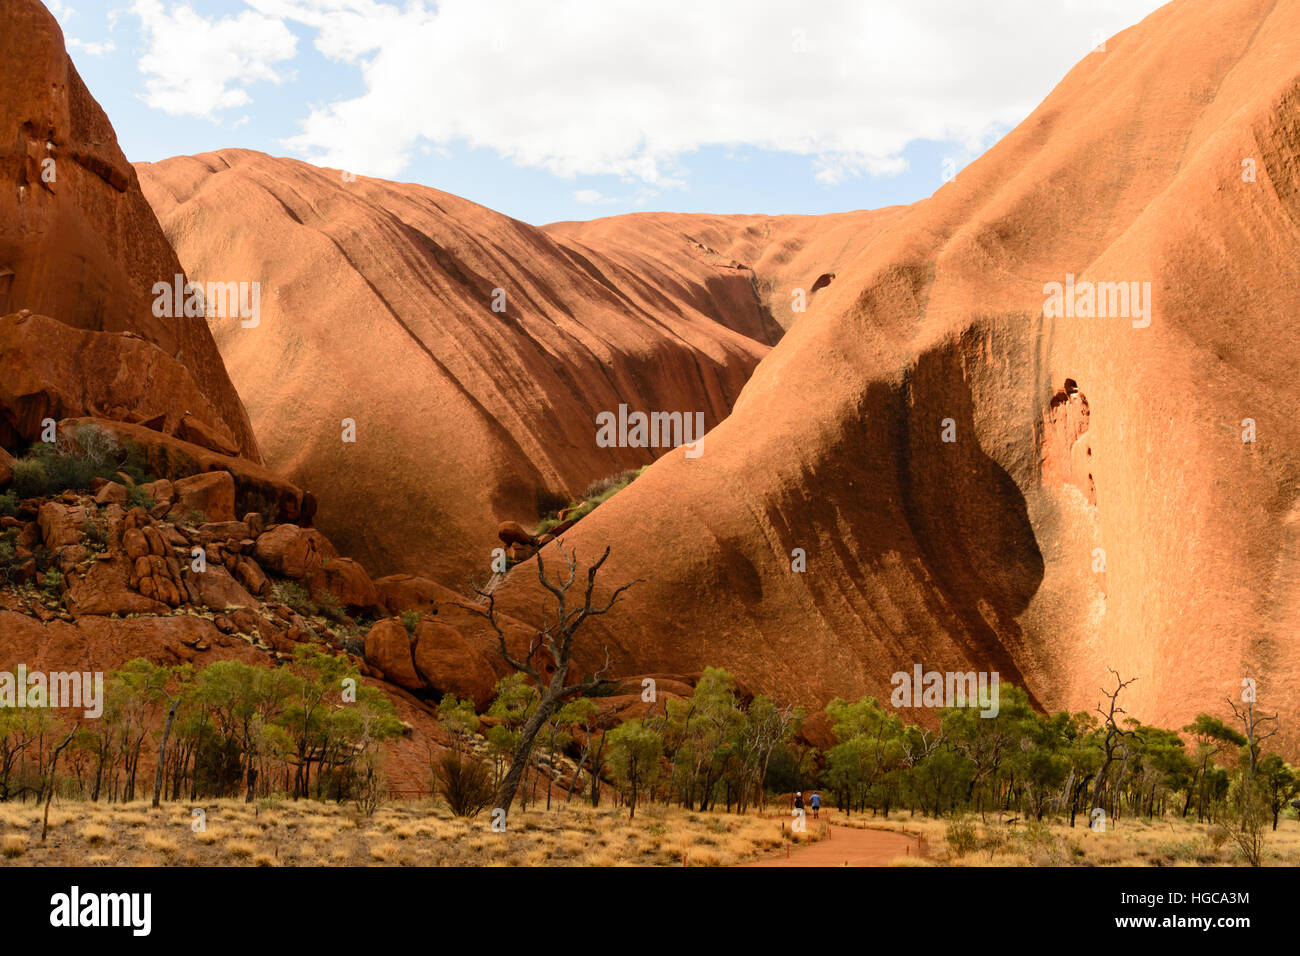 Close-up of Uluru (Ayers Rock) in the Northern Territory, Australia. Two people in front of it show its size. Stock Photo